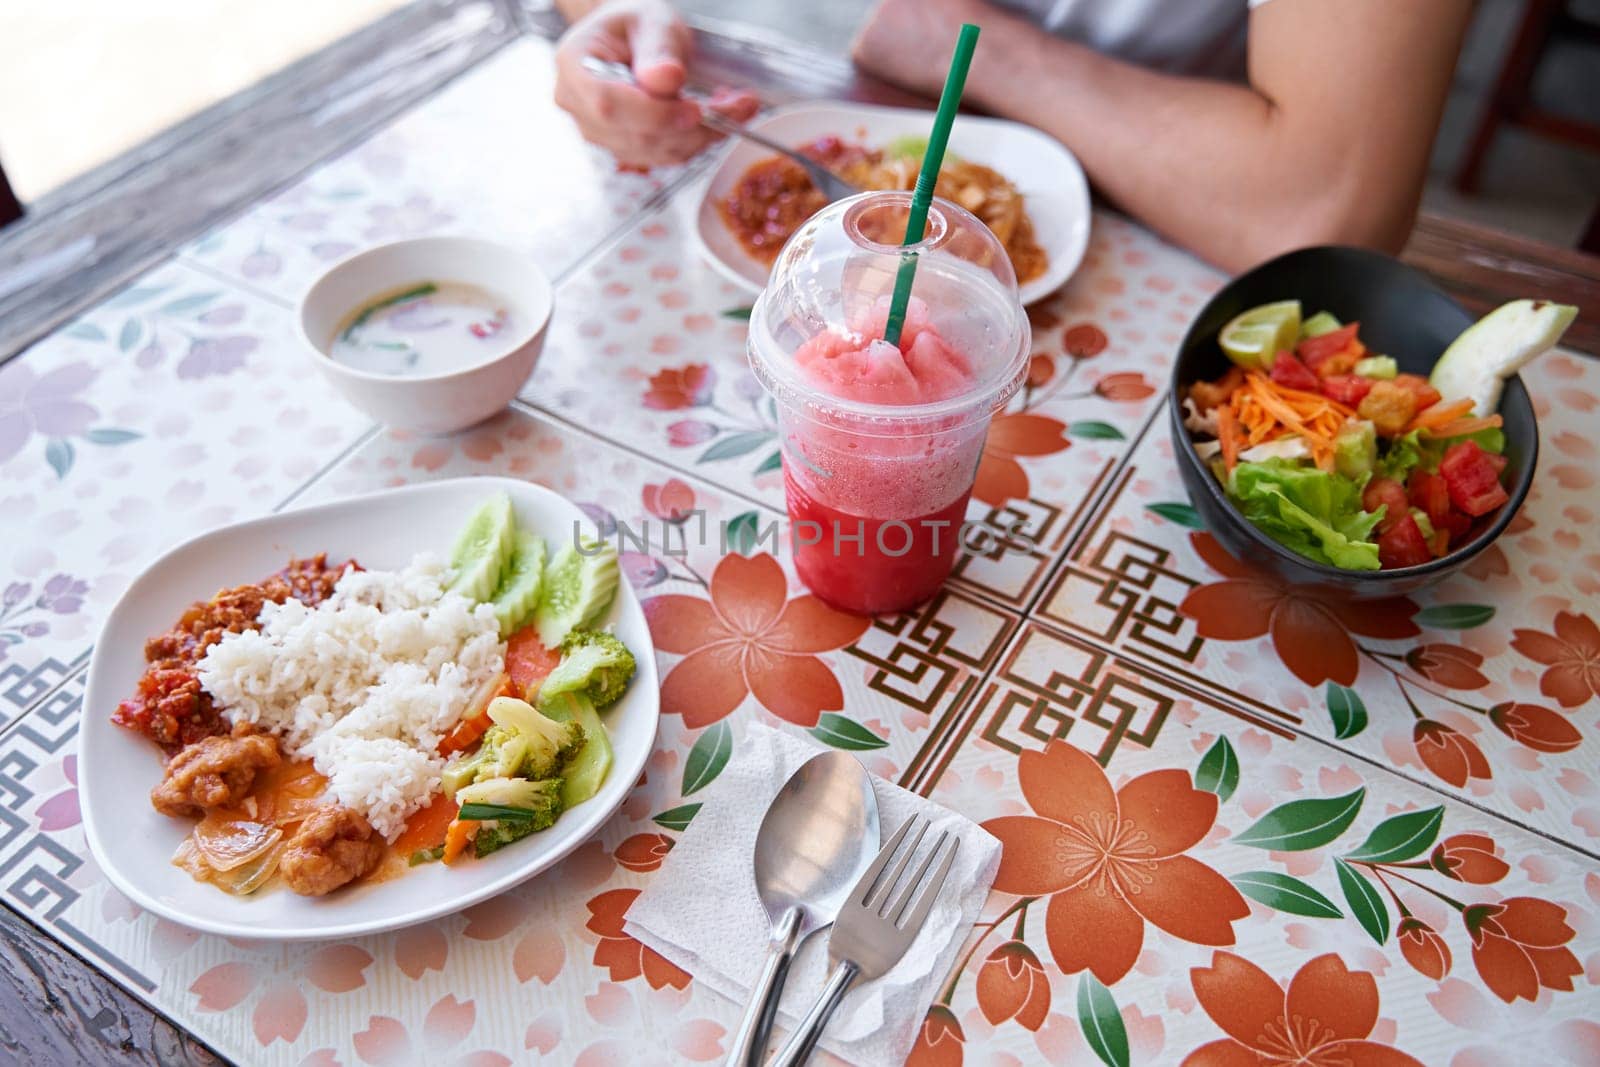 Delicious Thai Cuisine: Plates and People Dining at a Local Cafe.